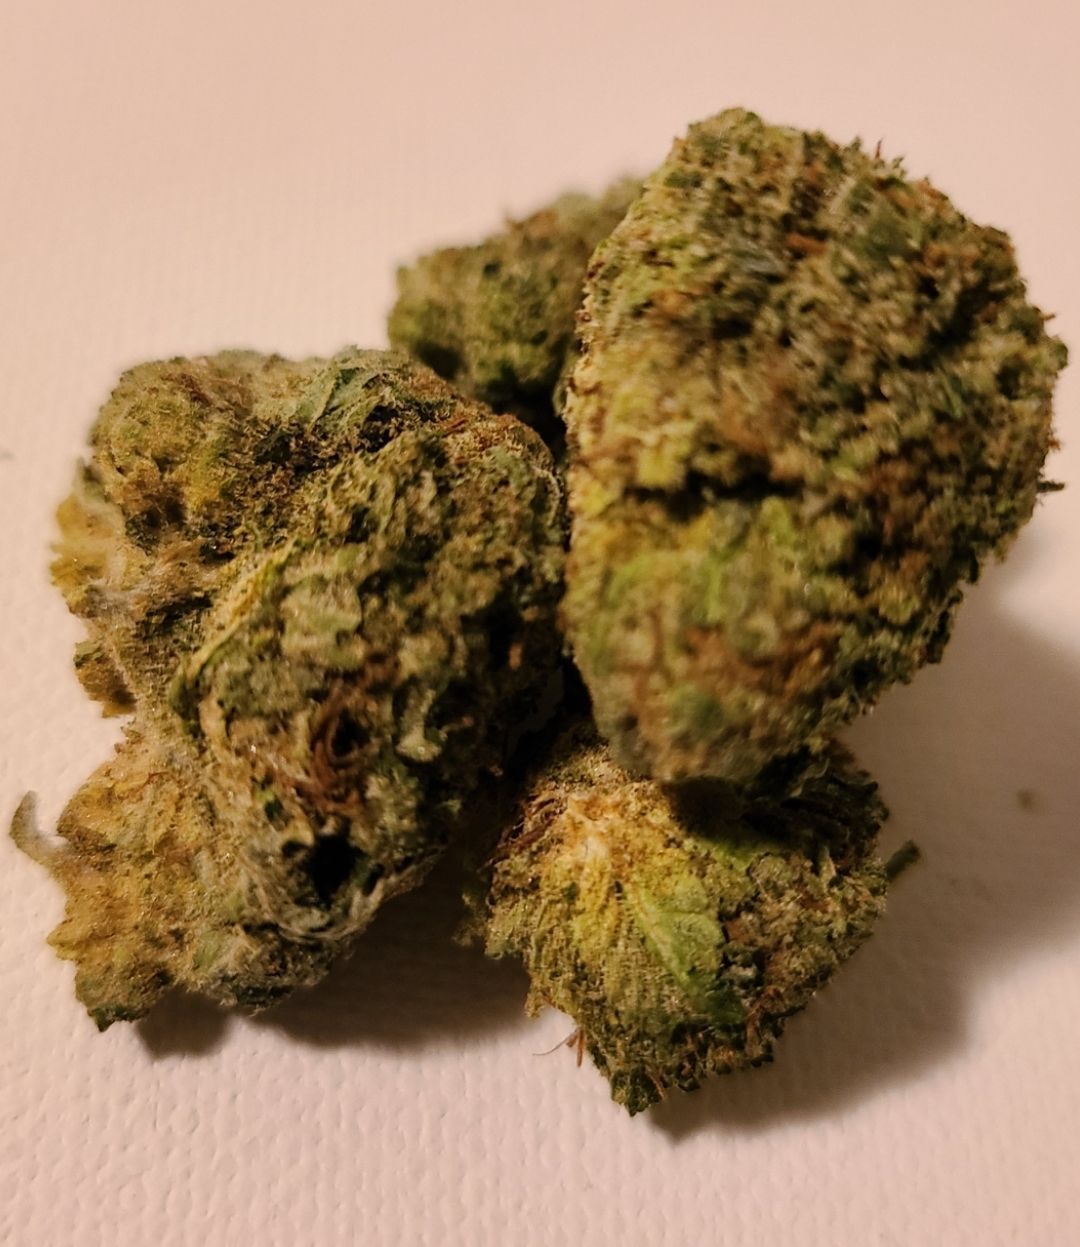 Getting to know on order weed online Canada post thumbnail image